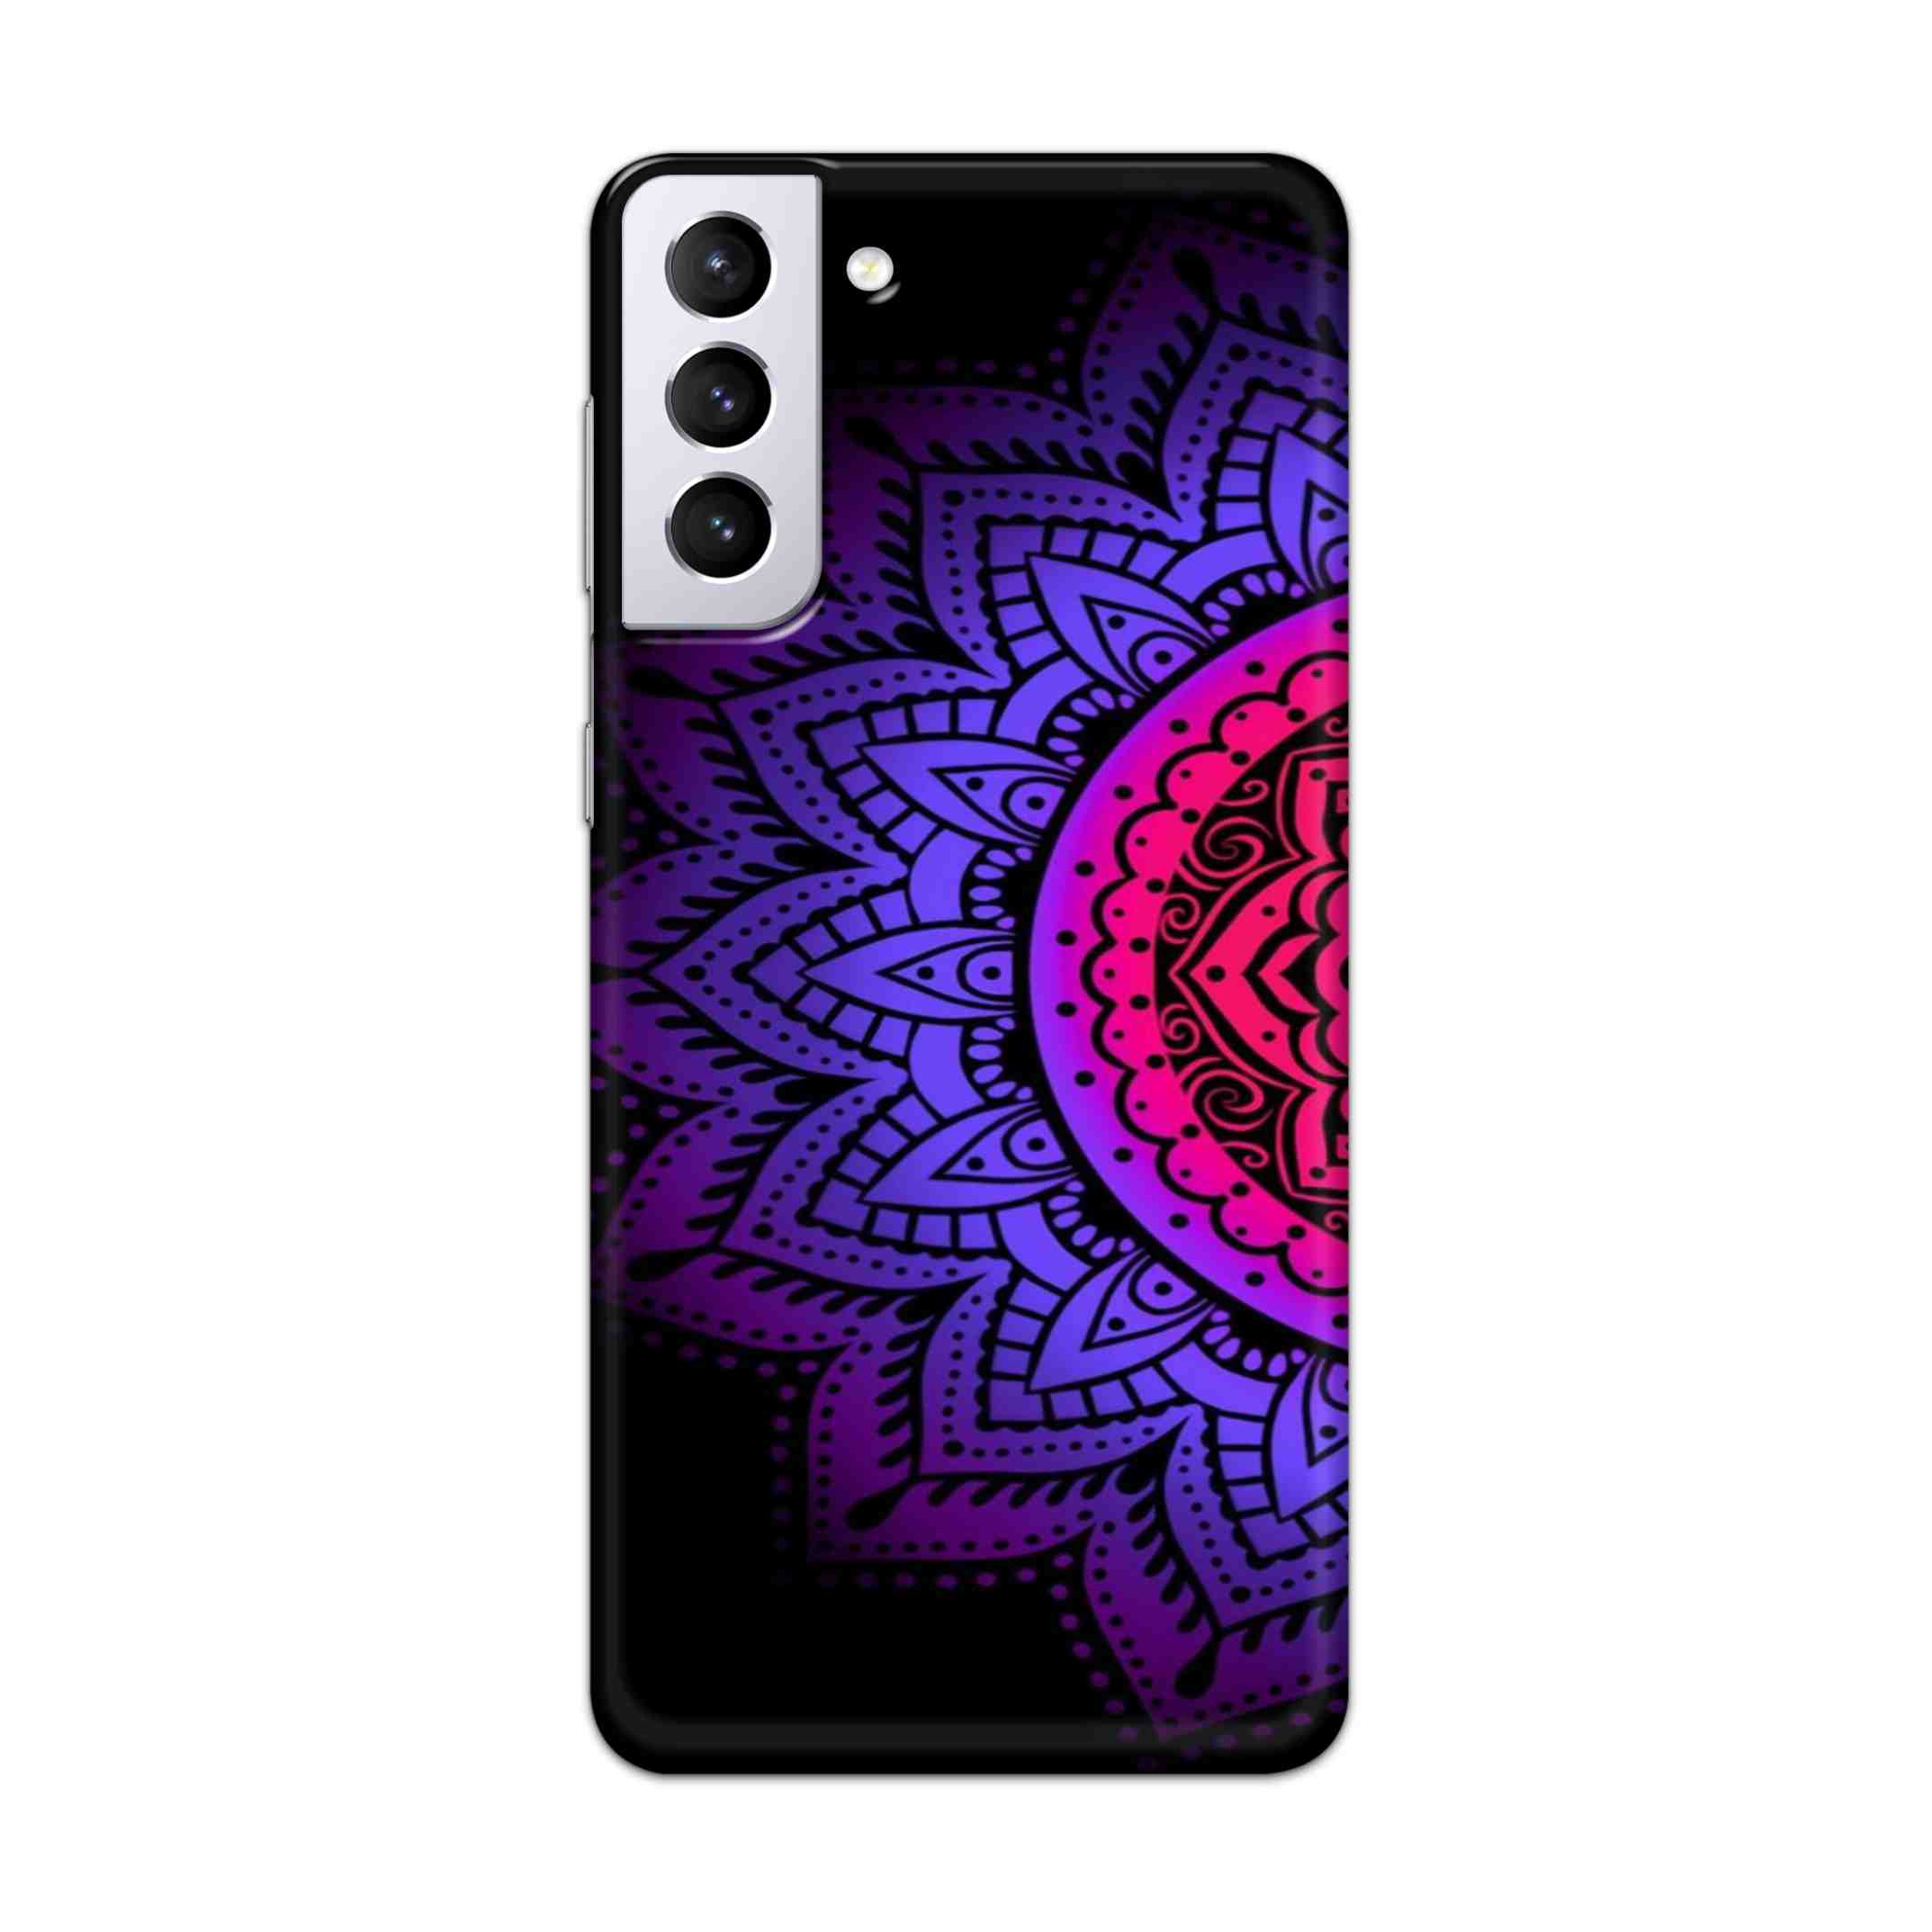 Buy Sun Mandala Hard Back Mobile Phone Case Cover For Samsung Galaxy S21 Plus Online